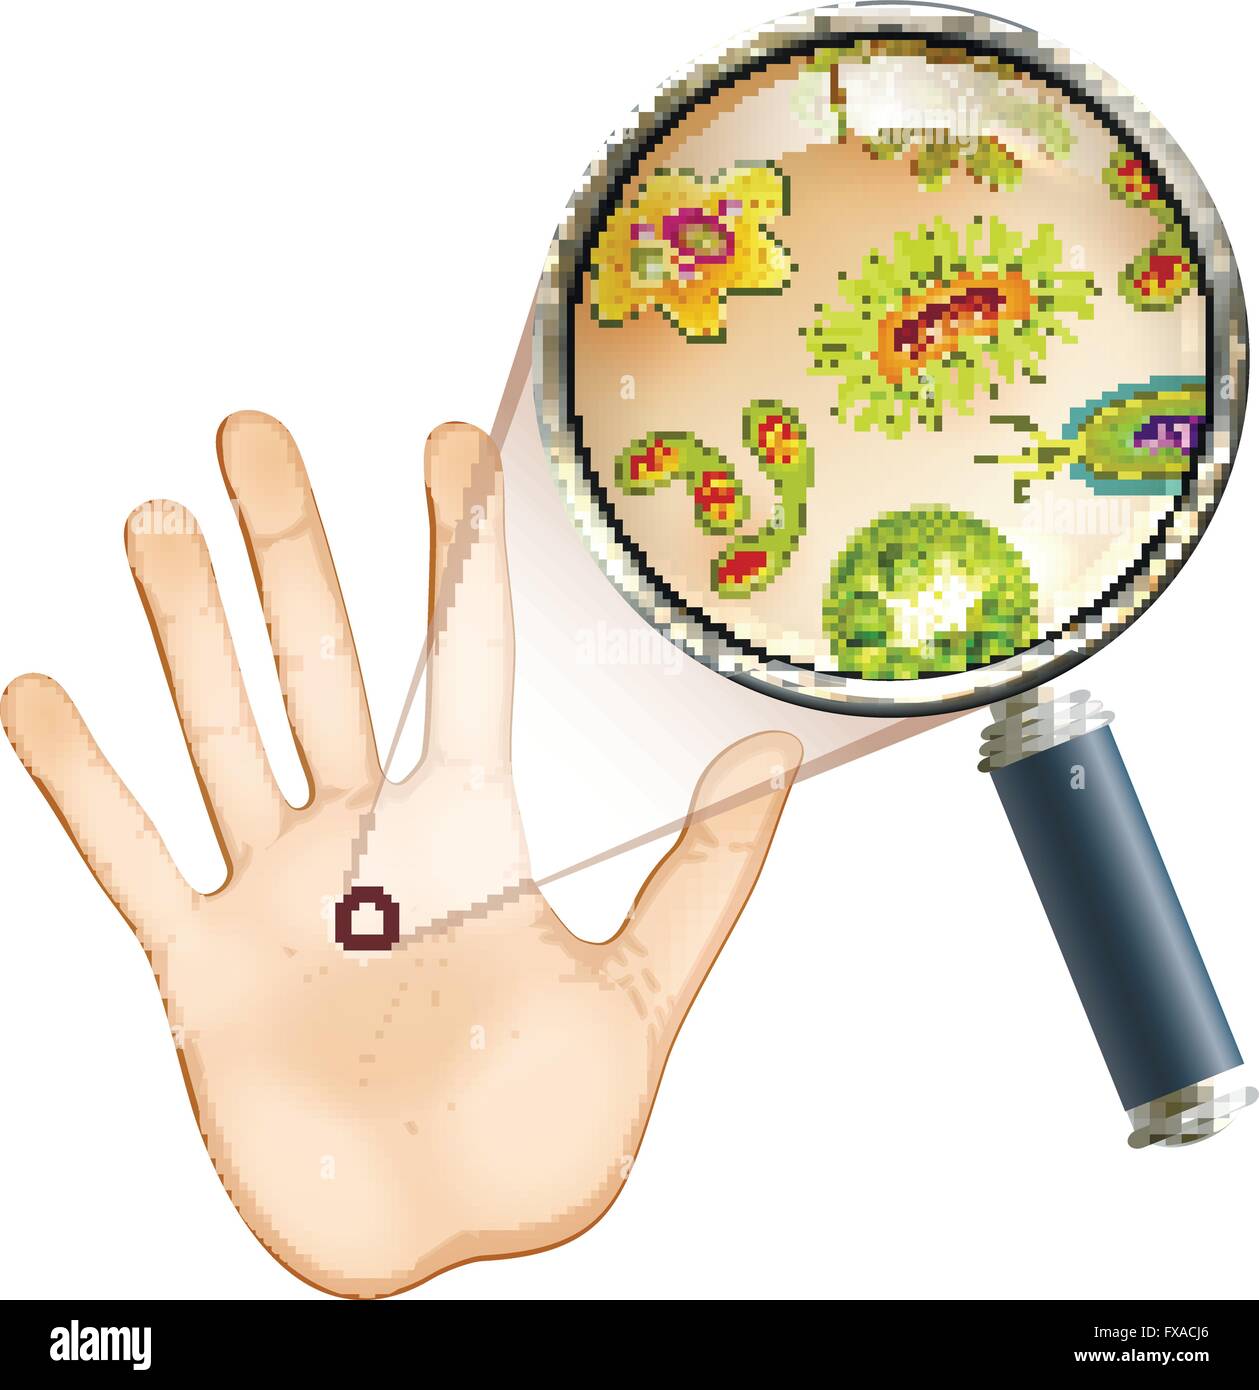 microscopic germs on hands